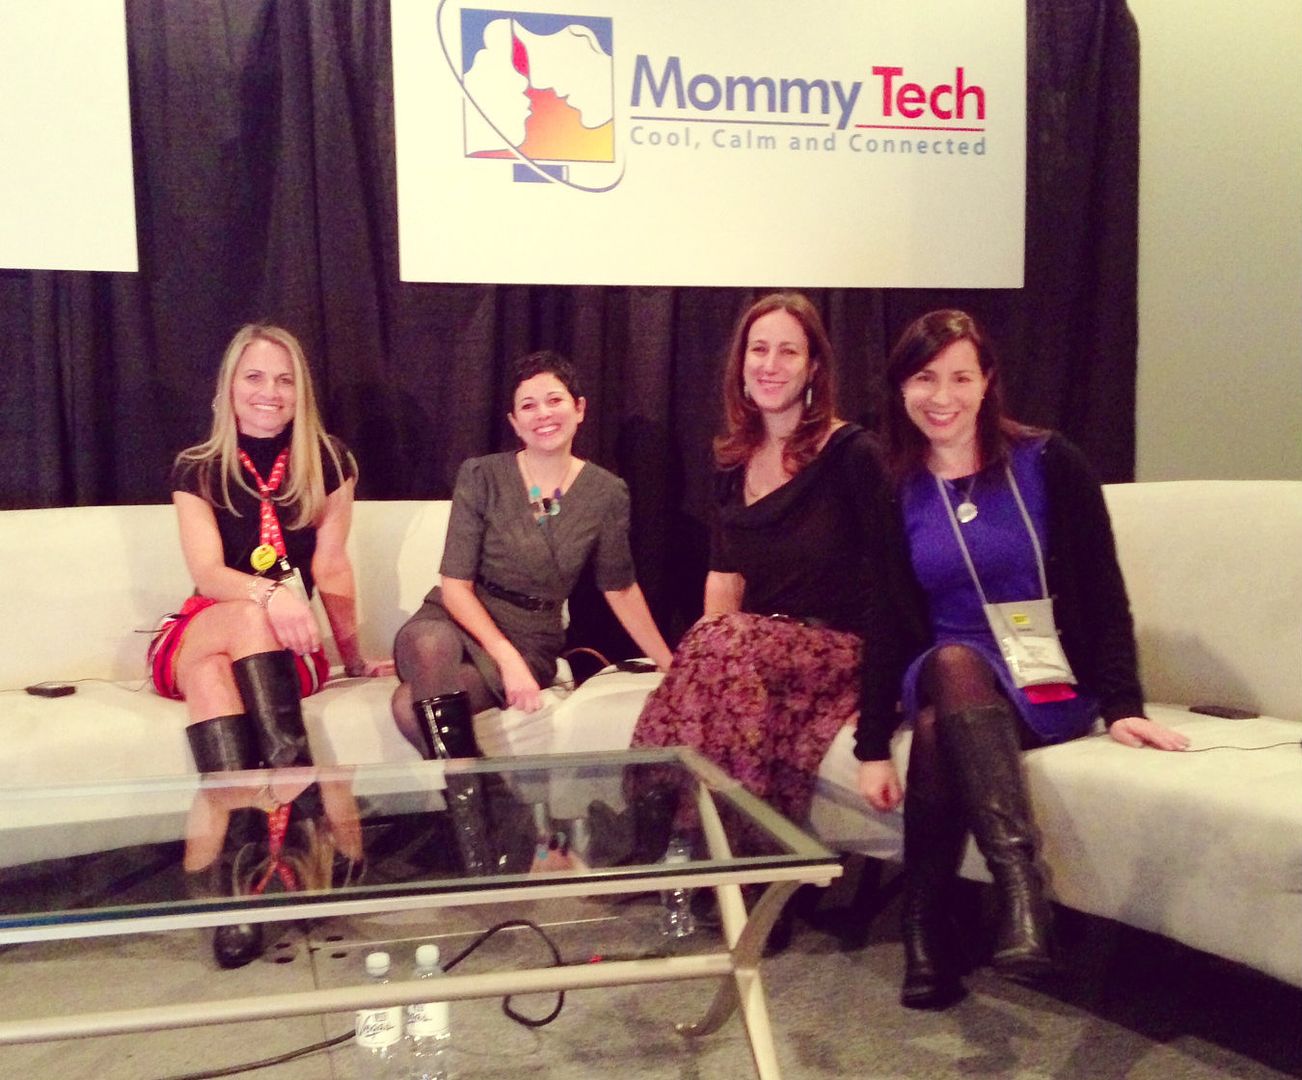 mommytech at CES 2014?